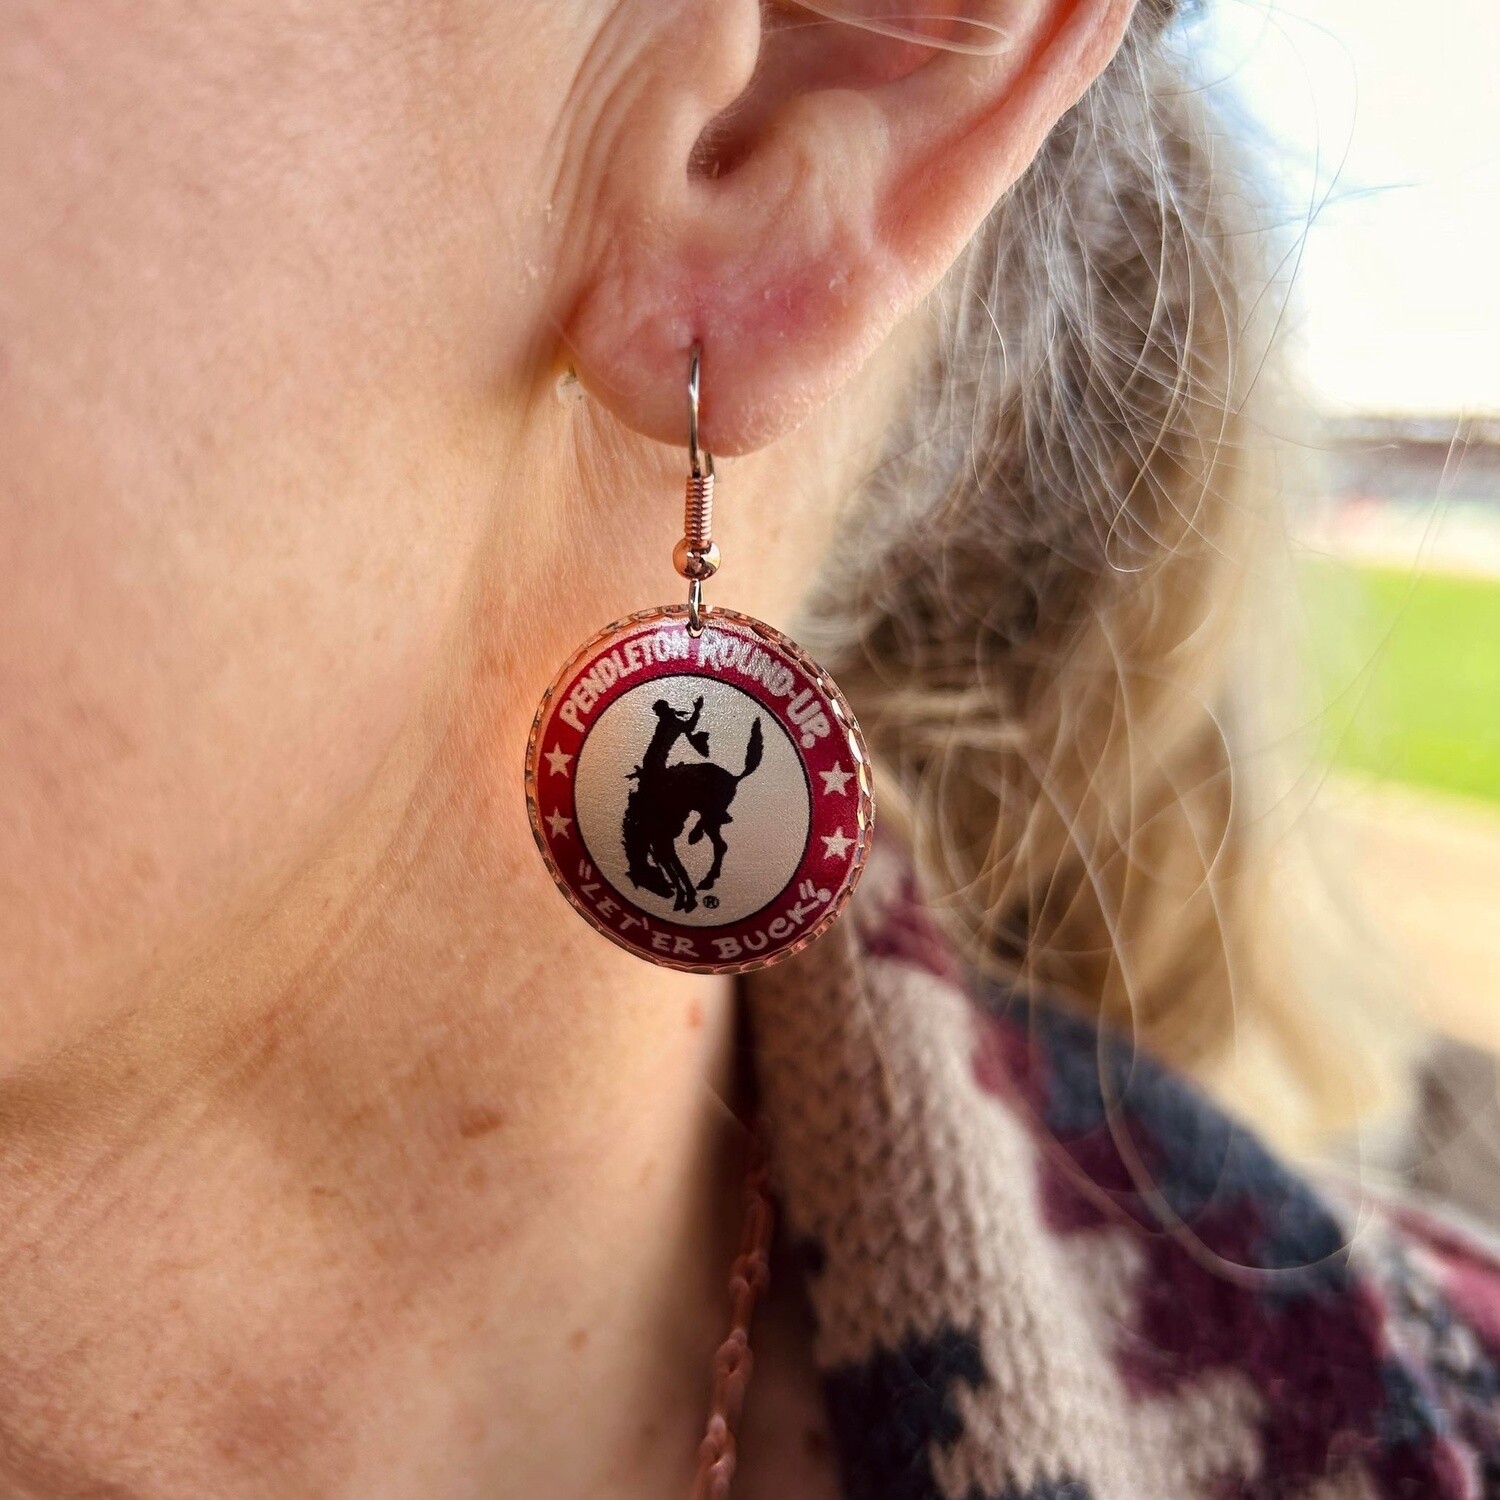 Pendleton Round-Up Red Star Copper Earrings